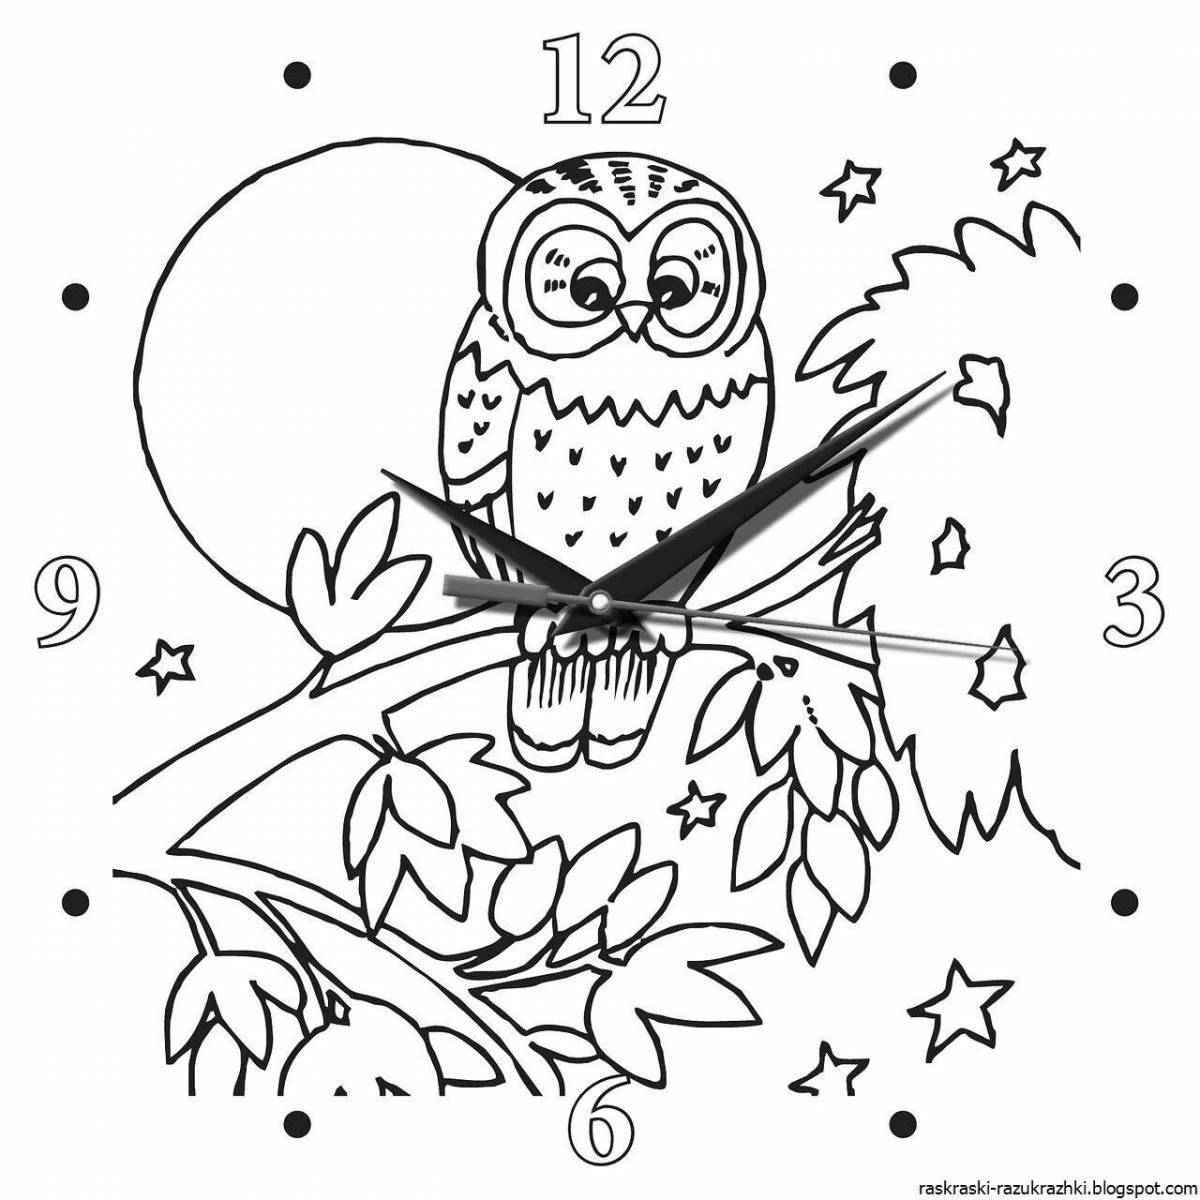 Exquisite Christmas owl coloring book